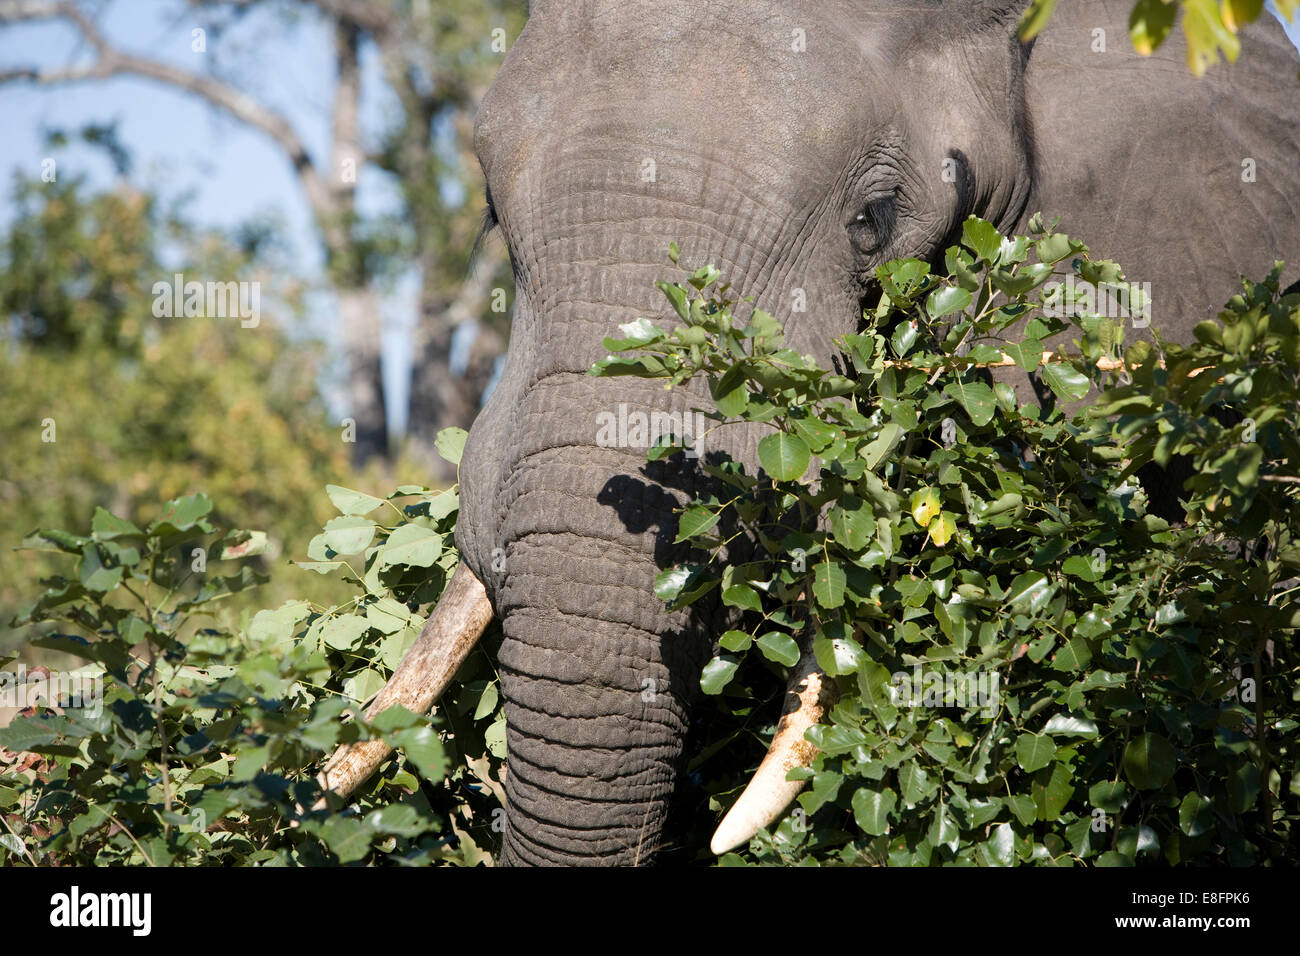 Close-up of elephant in musk Stock Photo